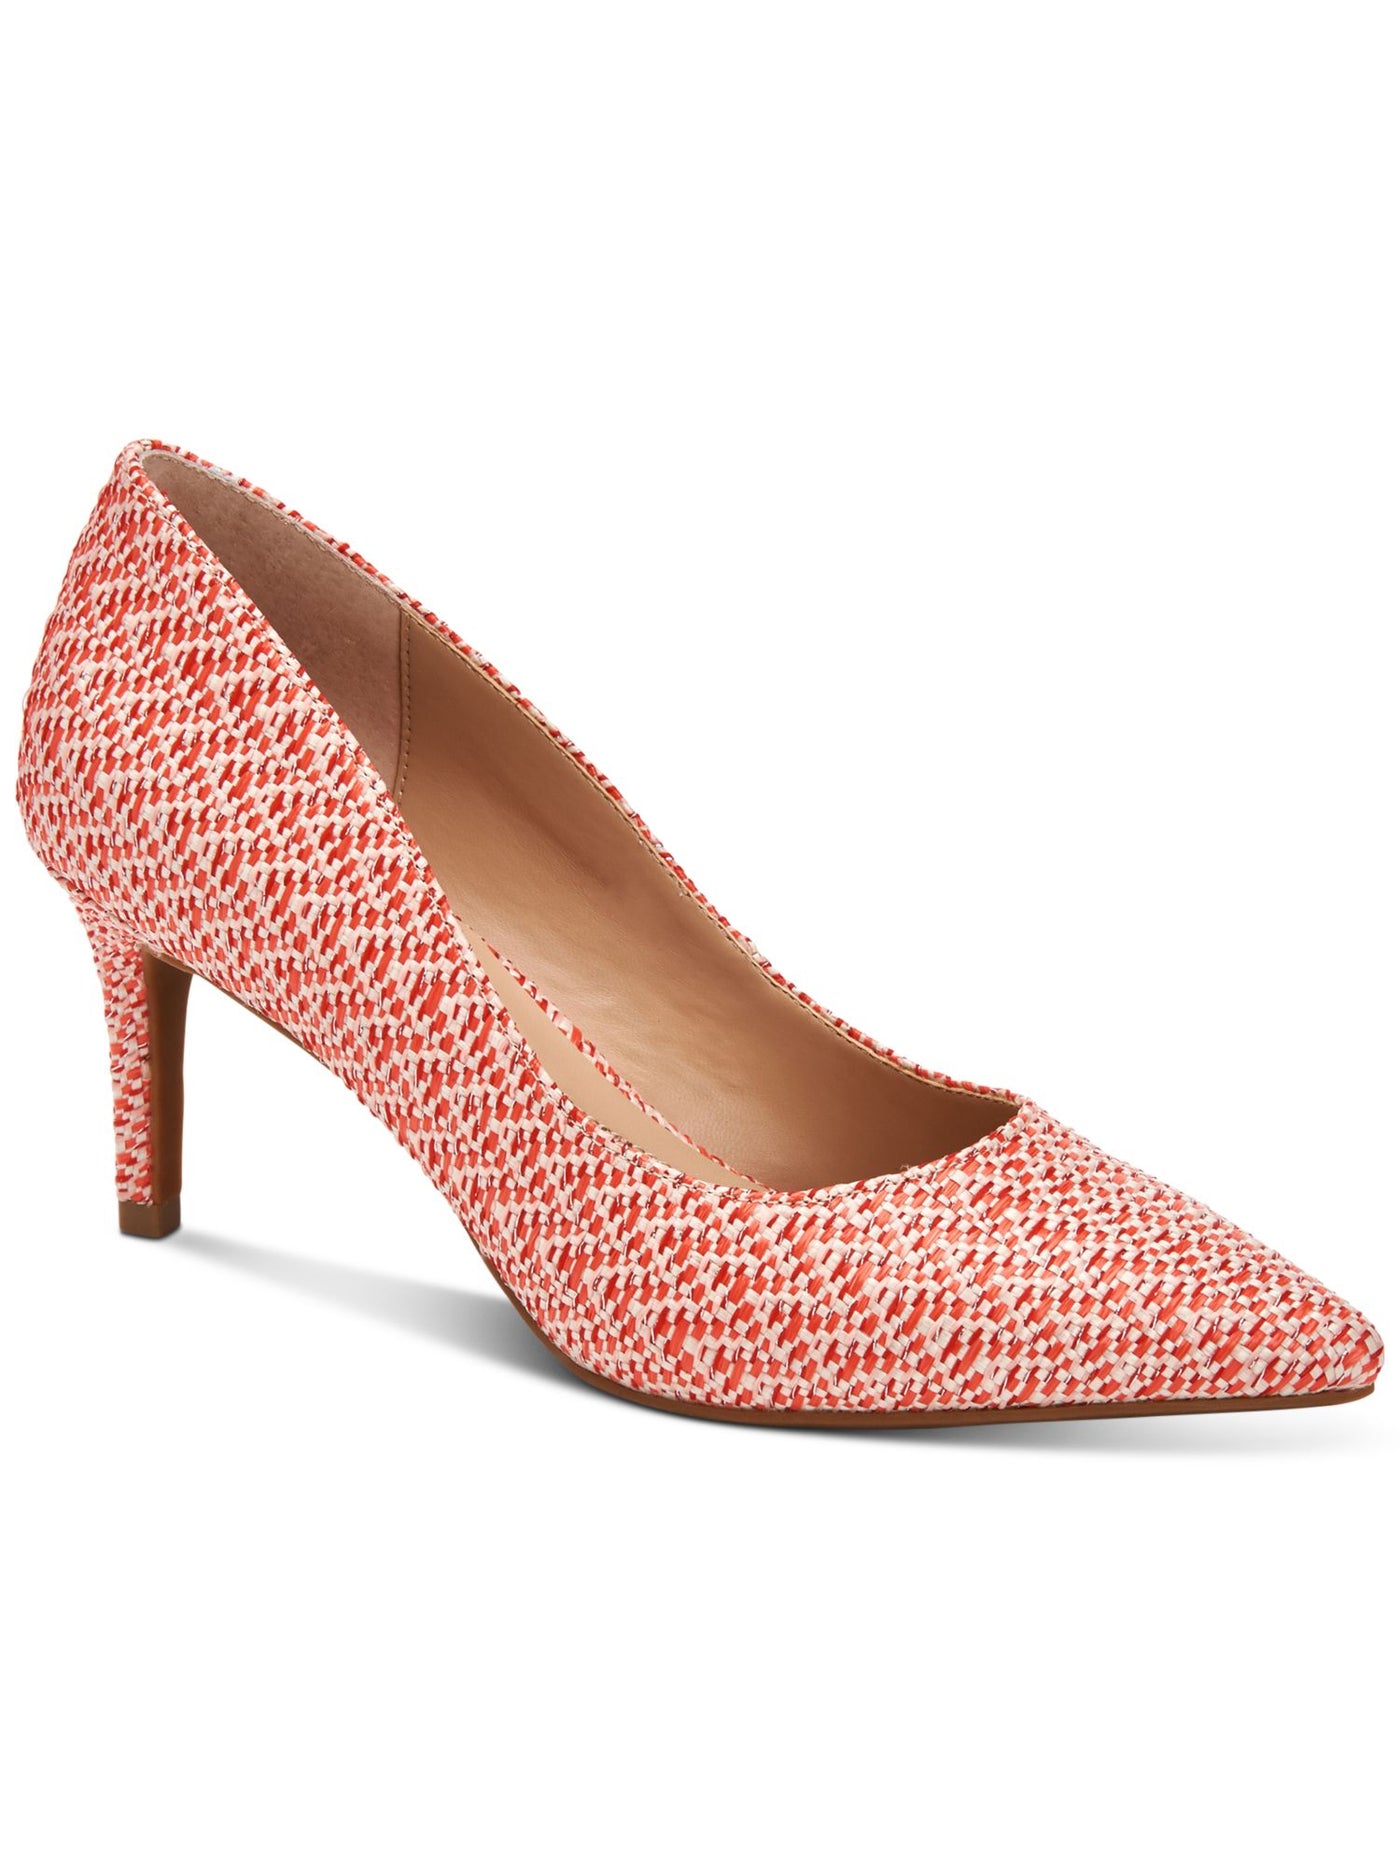 ALFANI Womens Coral Woven Padded Comfort Jeules Pointed Toe Stiletto Slip On Pumps Shoes 11 M